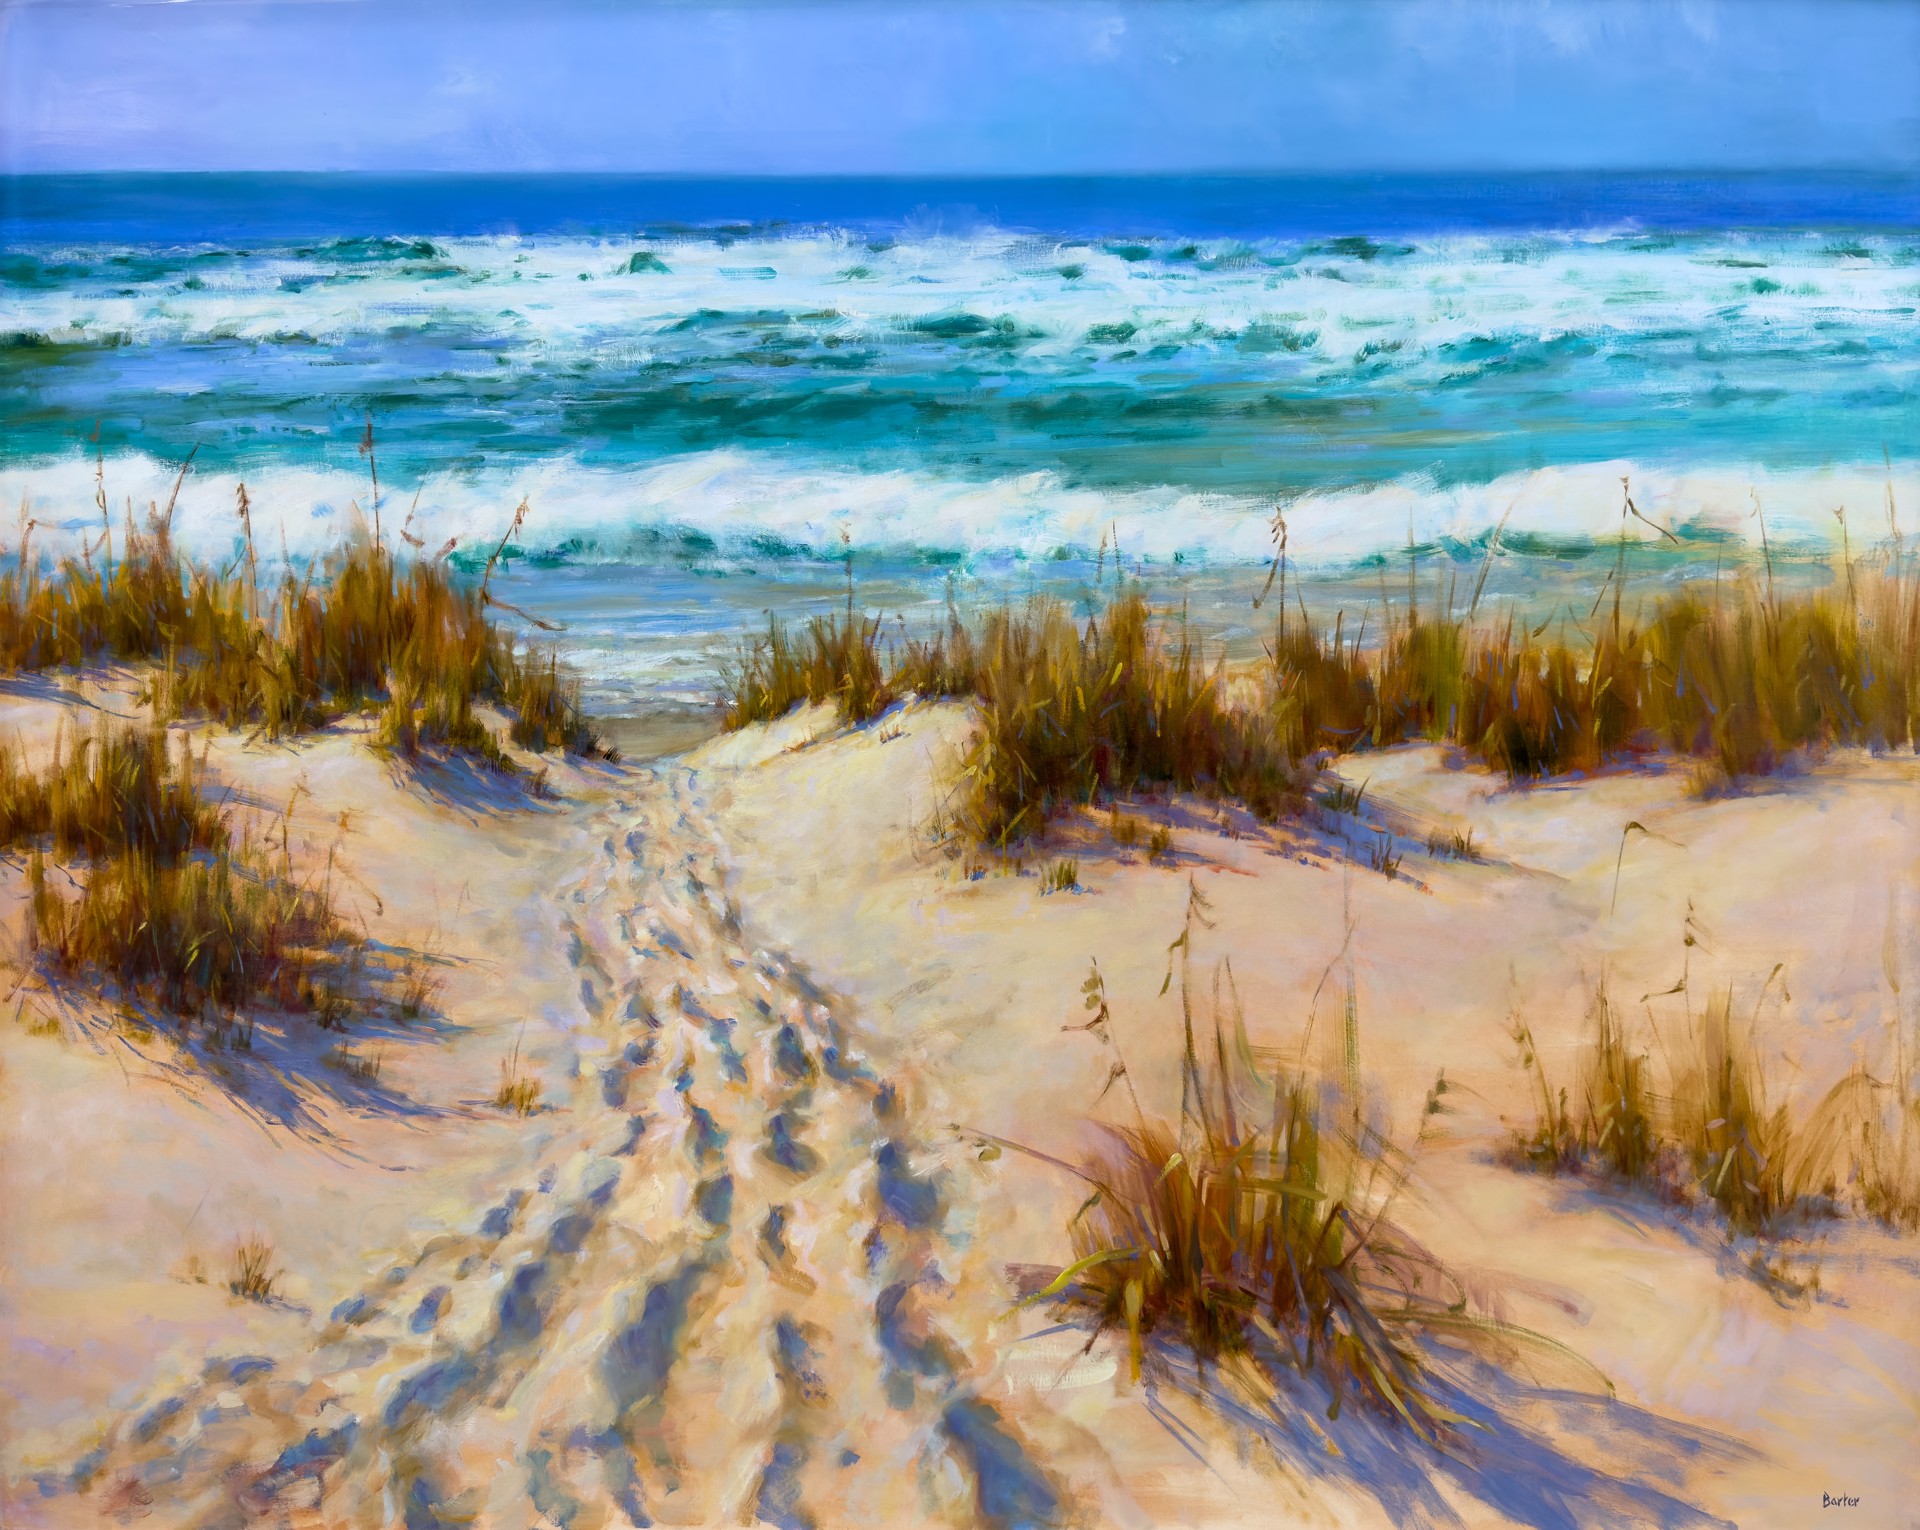 "Footpath to the Beach" by Stacy Barter